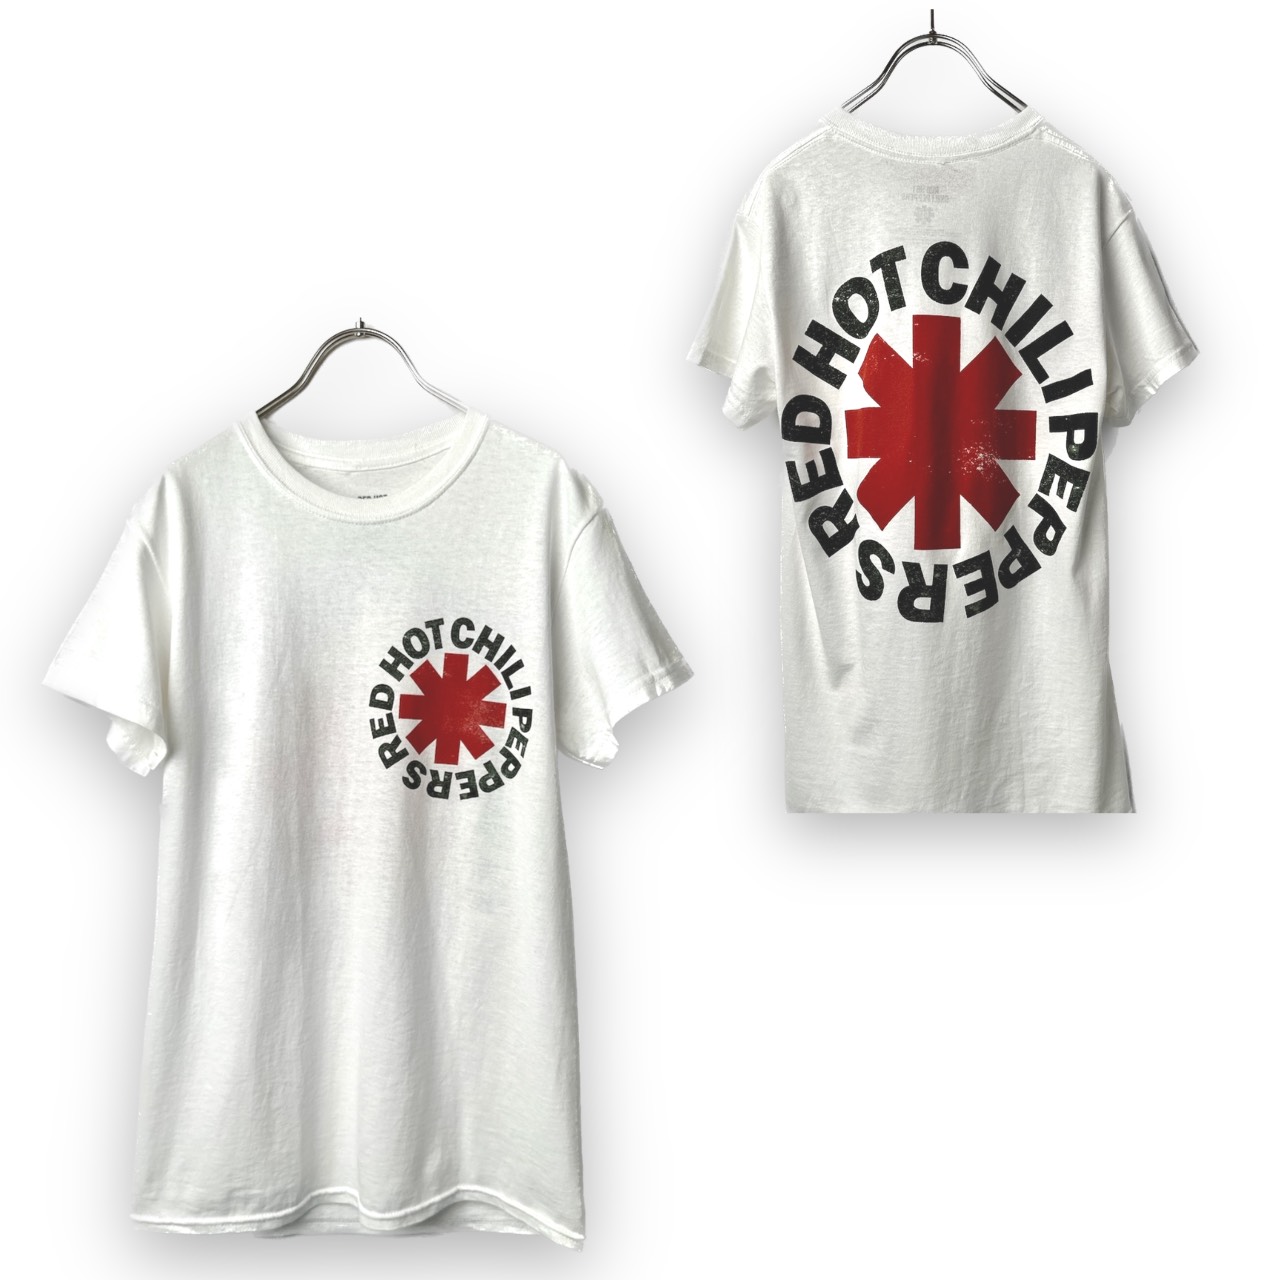 ☆RED HOT CHILI PEPPERS レッチリ Tシャツ FOG-